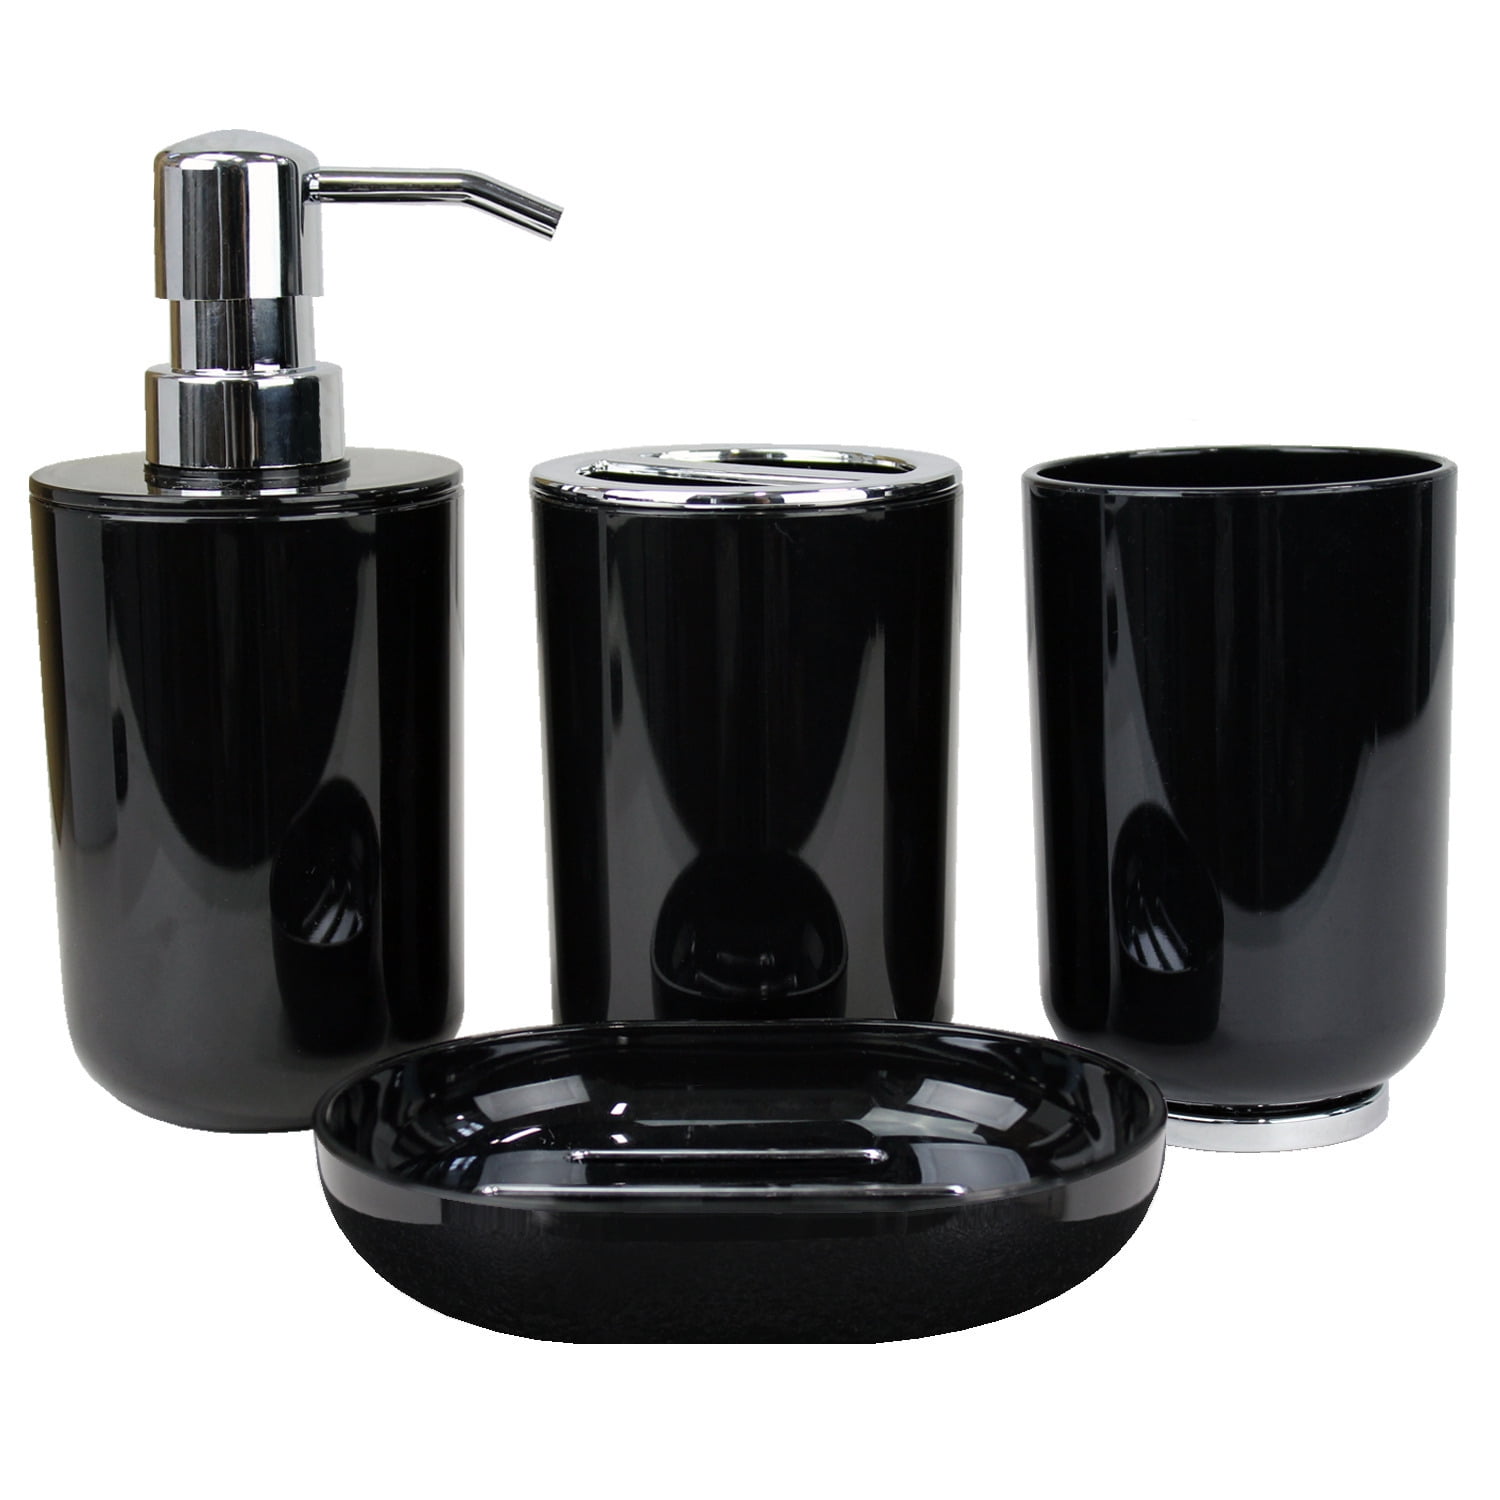 4-Pieces Resin Bath Accessory Completes with Soap Dispenser Toothbrush Holder Tumbler and Soap Dish KHH Black Bathroom Accessories Set